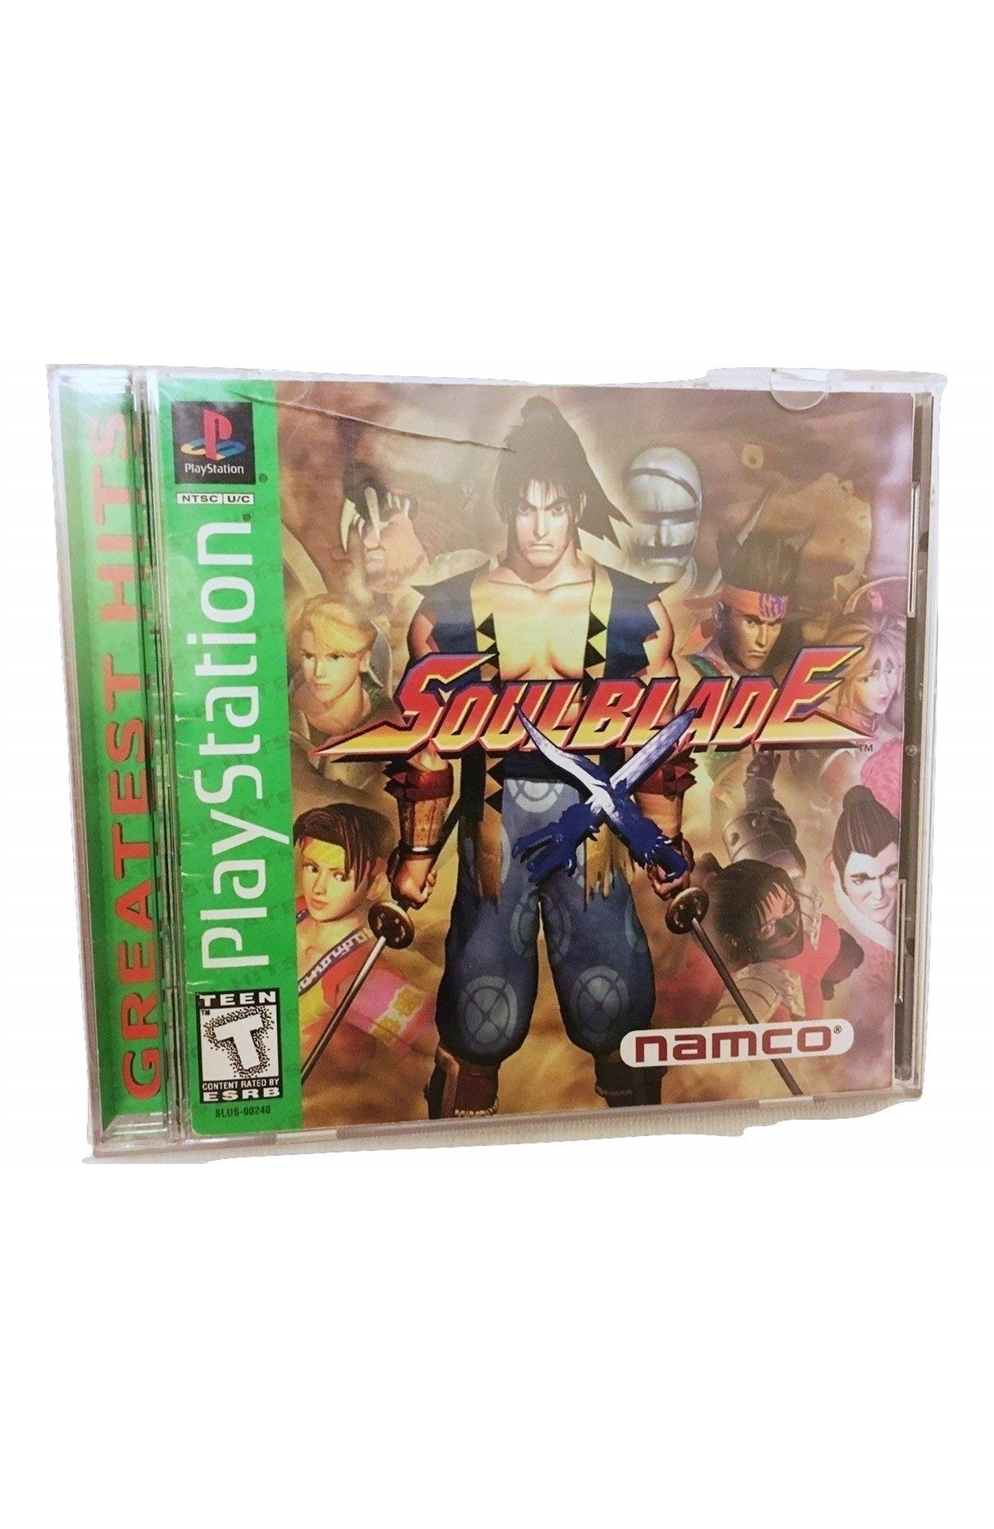 Playstation 1 Ps1 Soulblade